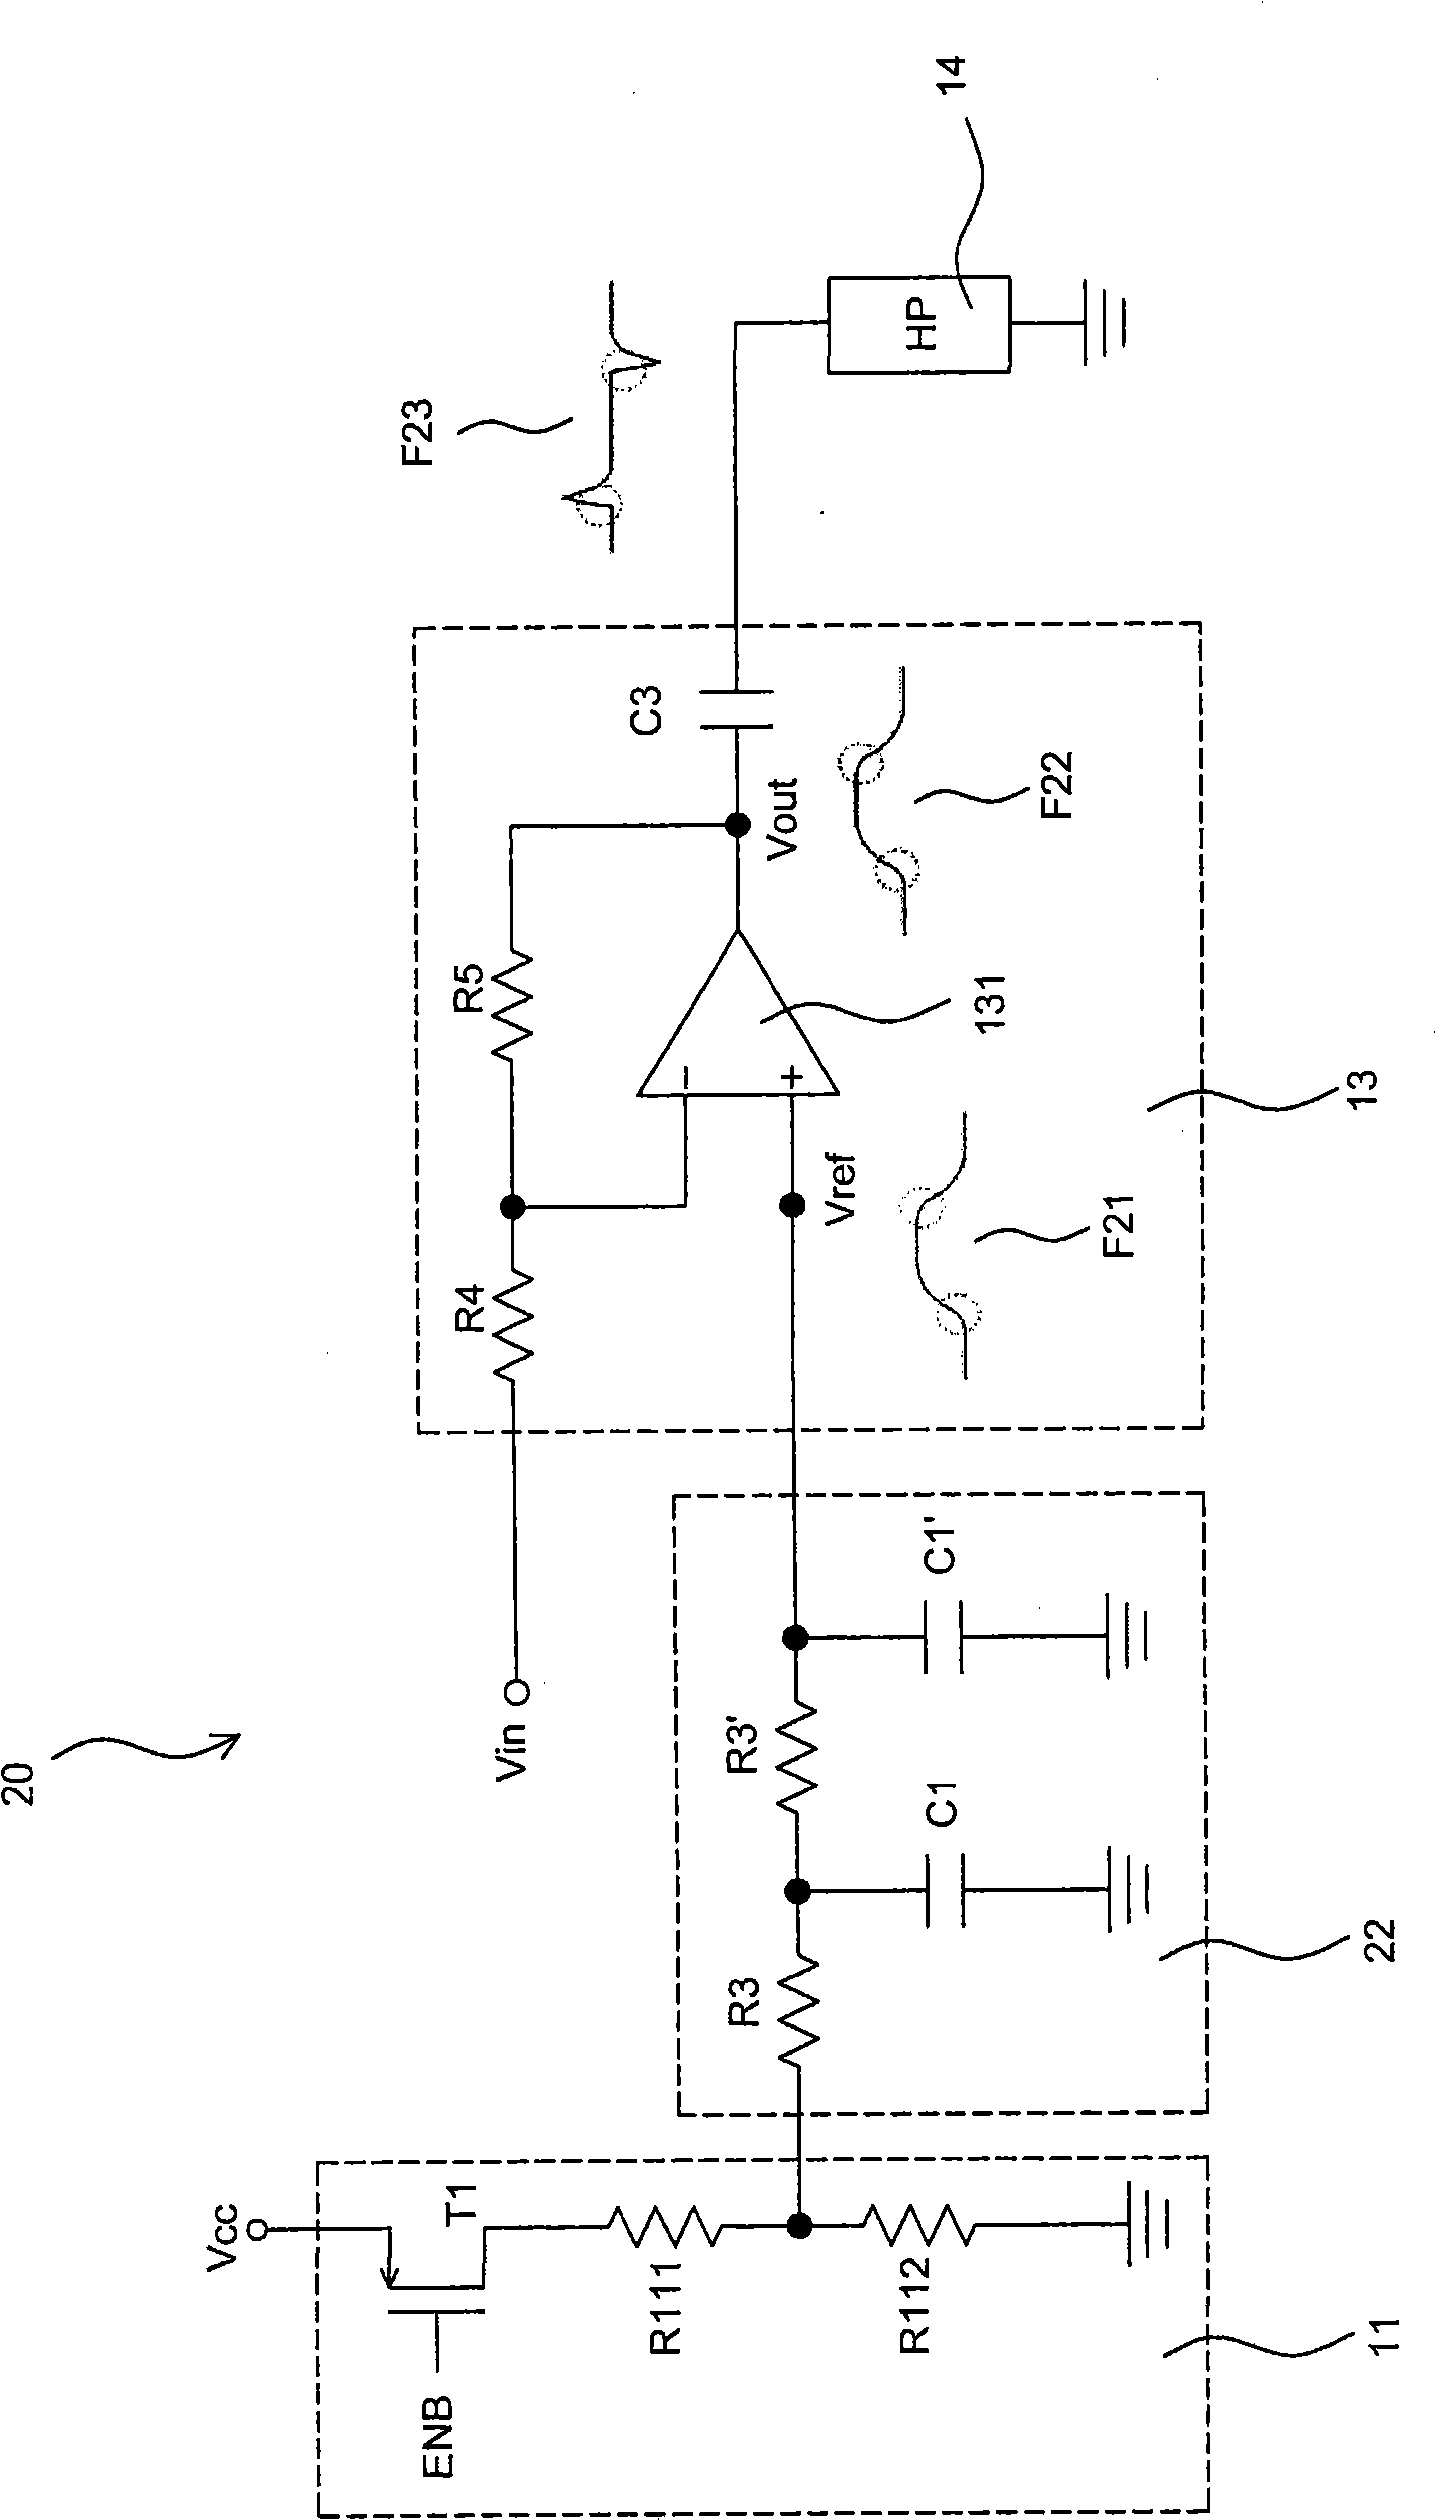 Voice drive circuit for reducing sonic boom when switching on and shutting down